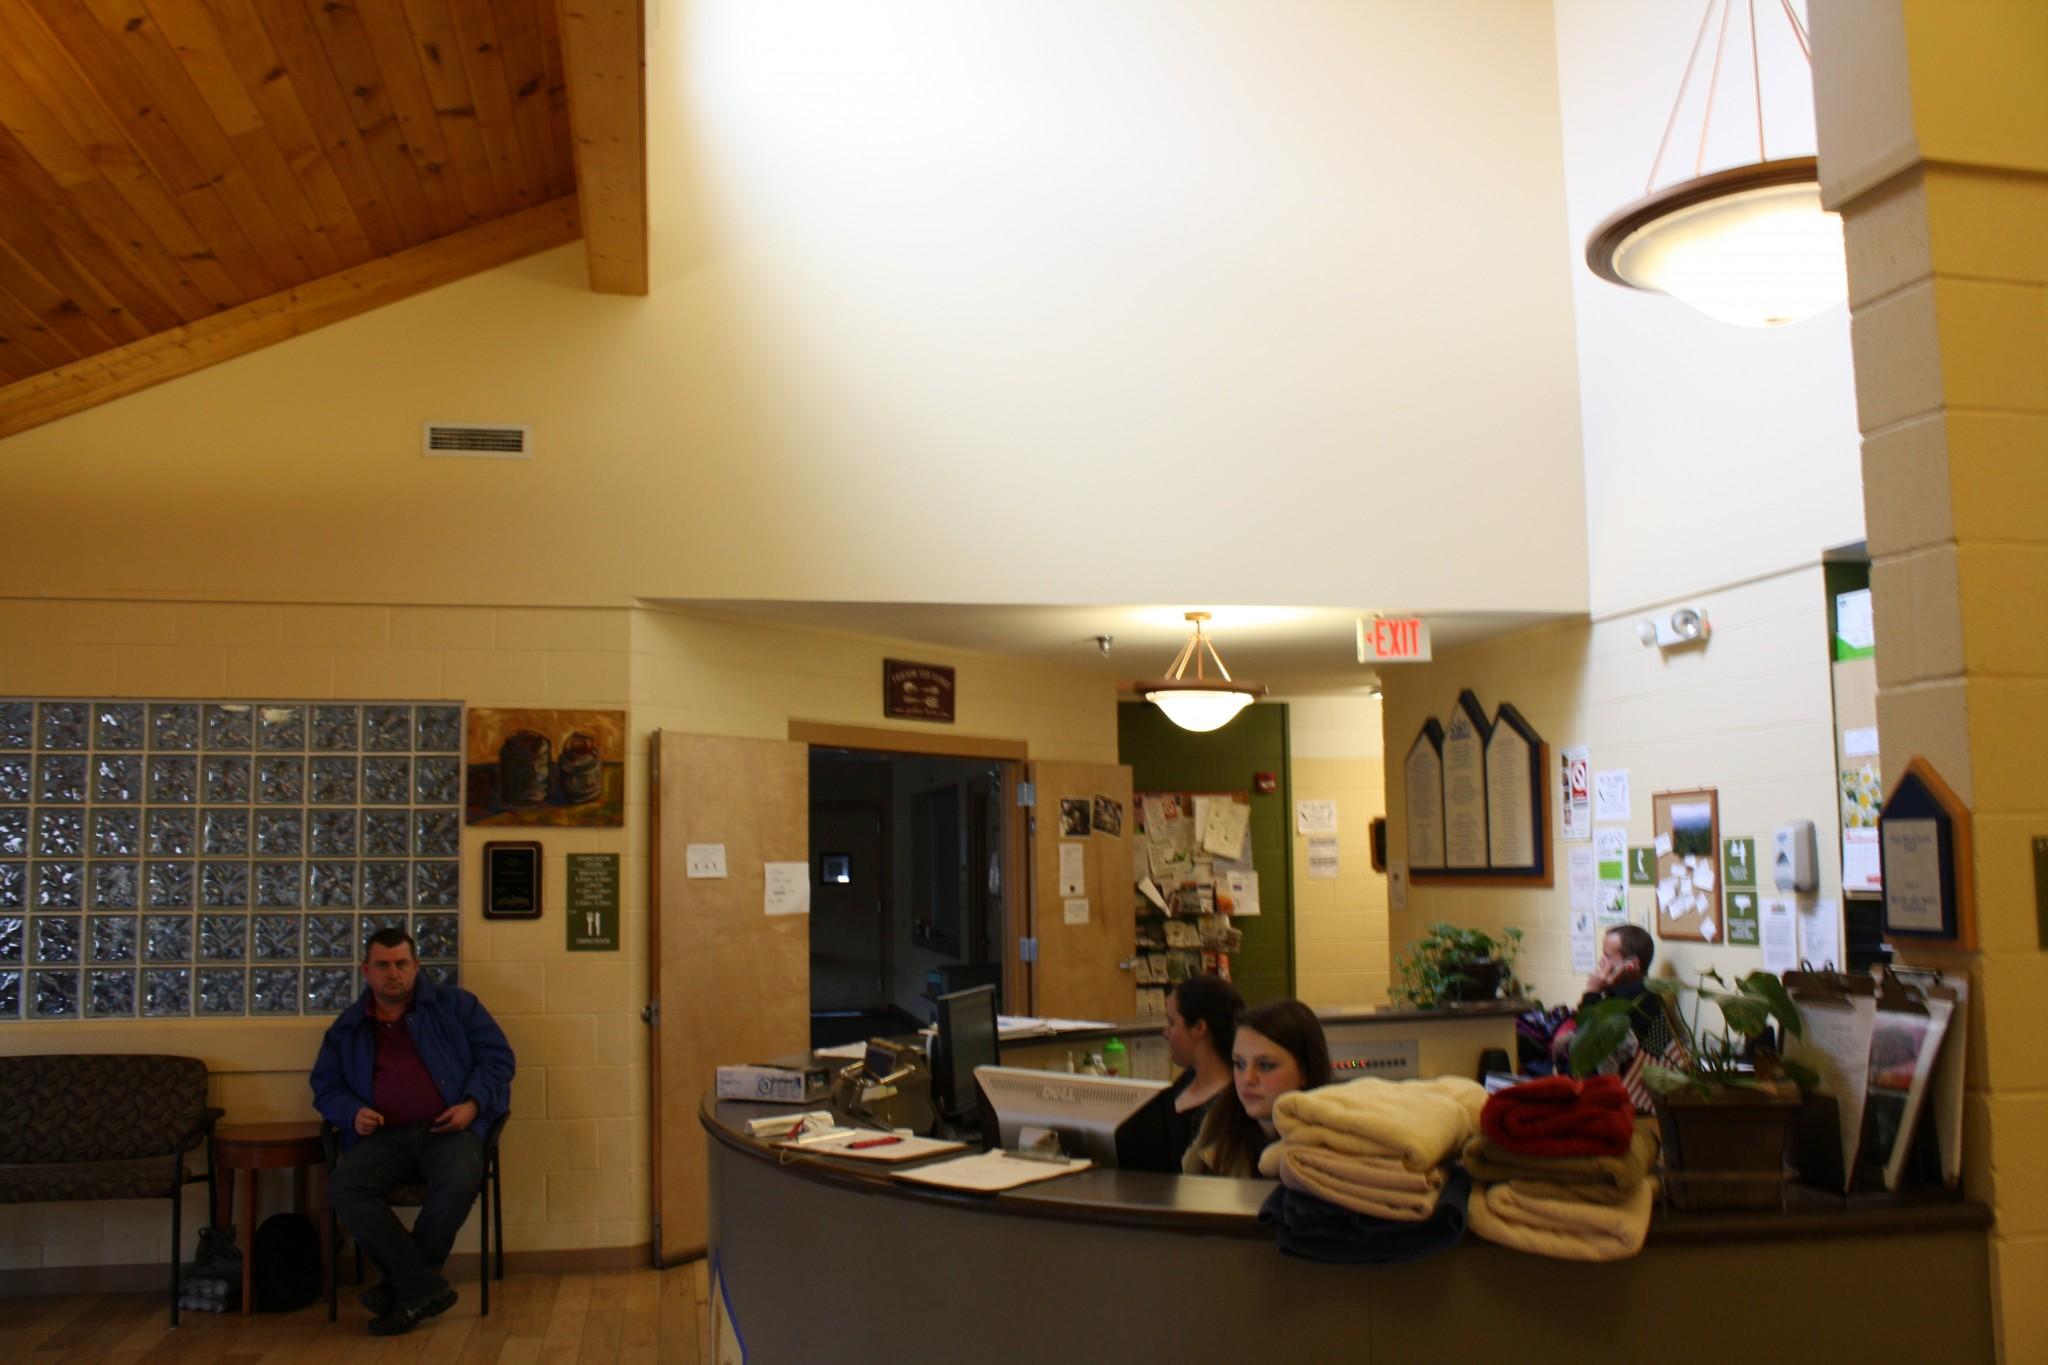 The Hospitality House, the only 24-hour crisis facility in the county, provides transitional housing and assistance for Watauga’s homeless population. Photo: Alan Beauvais | The Appalachian